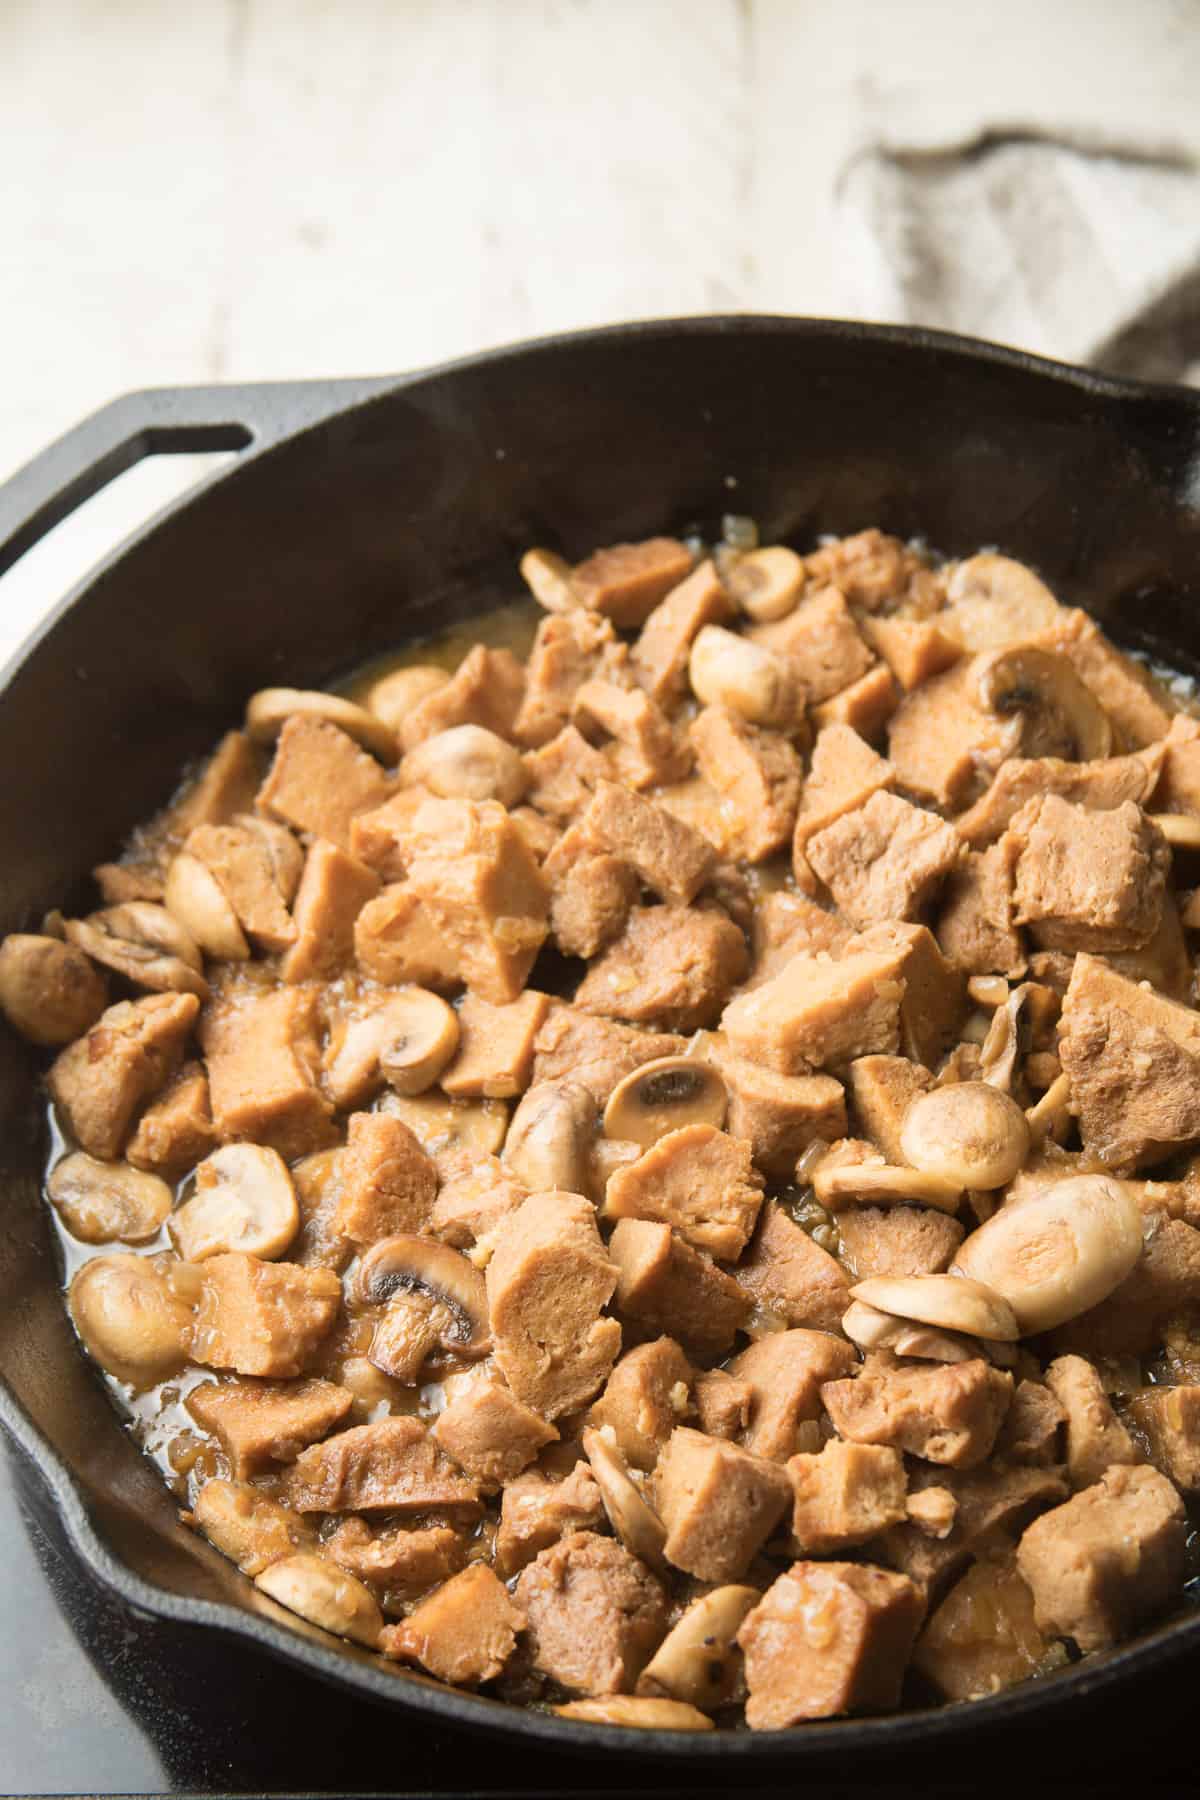 Seitan and mushrooms in a skillet.